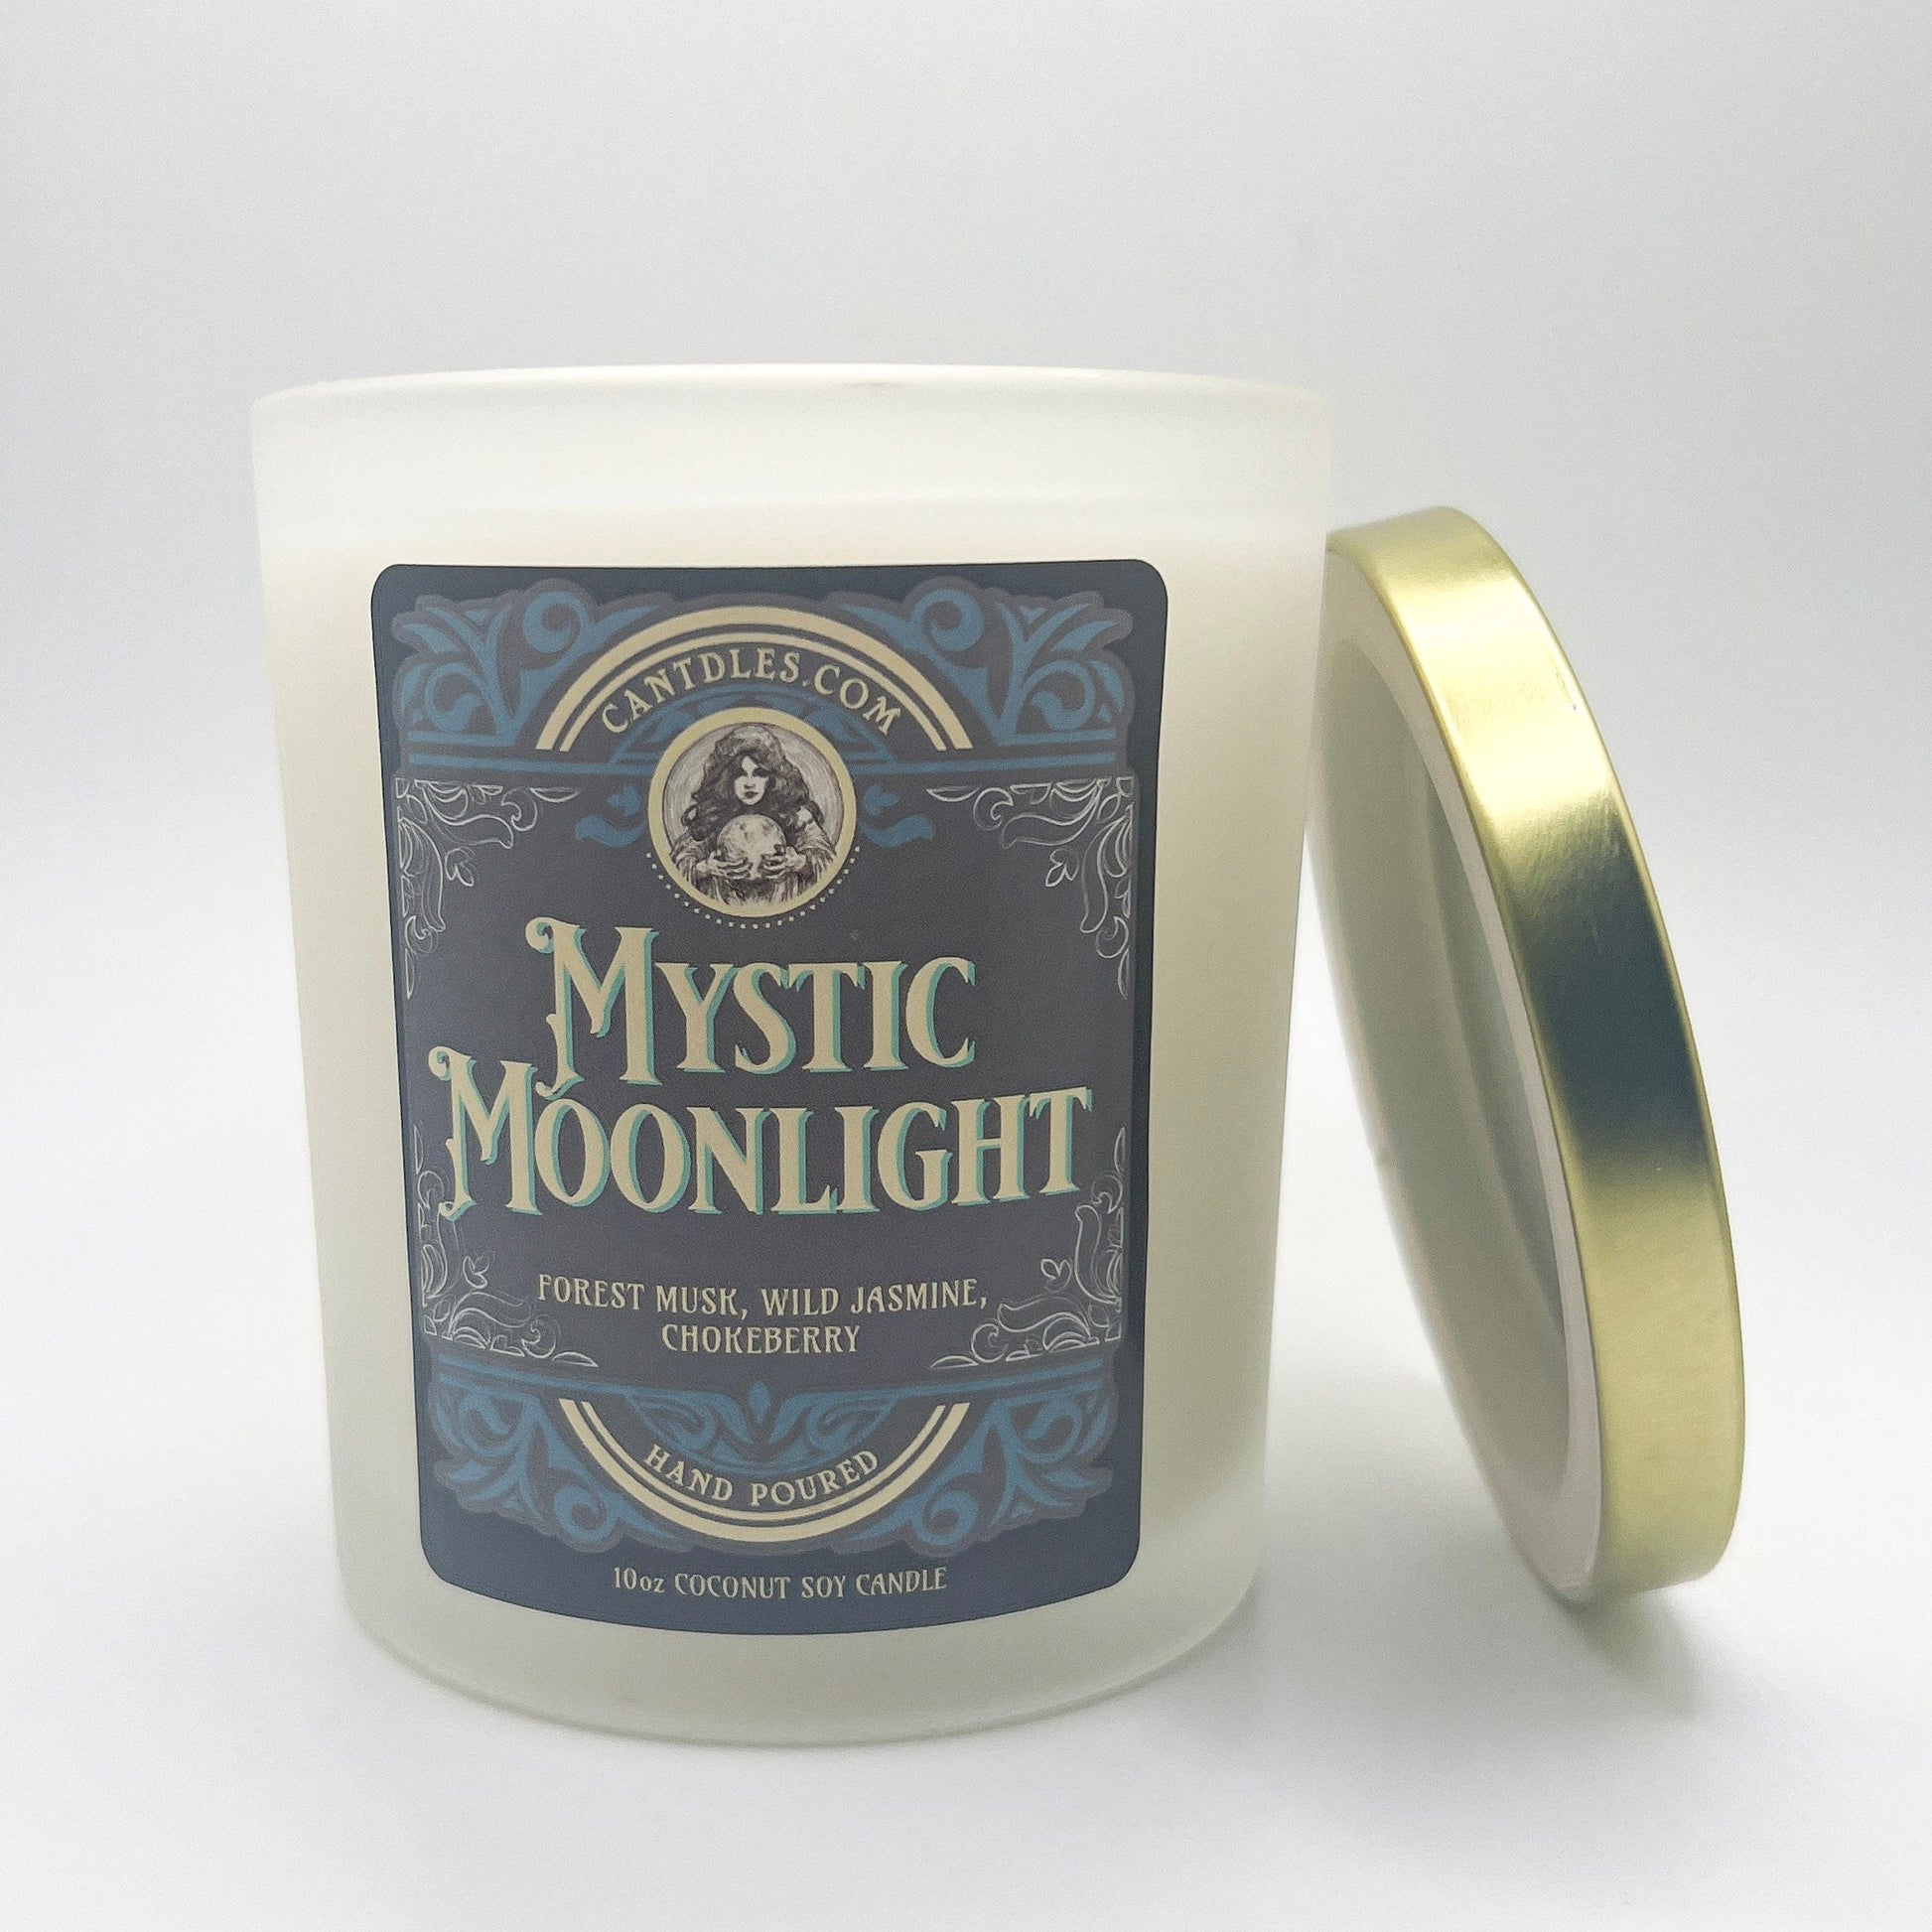 Can'tdles Candles 10oz Net Wt Jar Mystic Moonlight: Floral & Forest Scented Candle